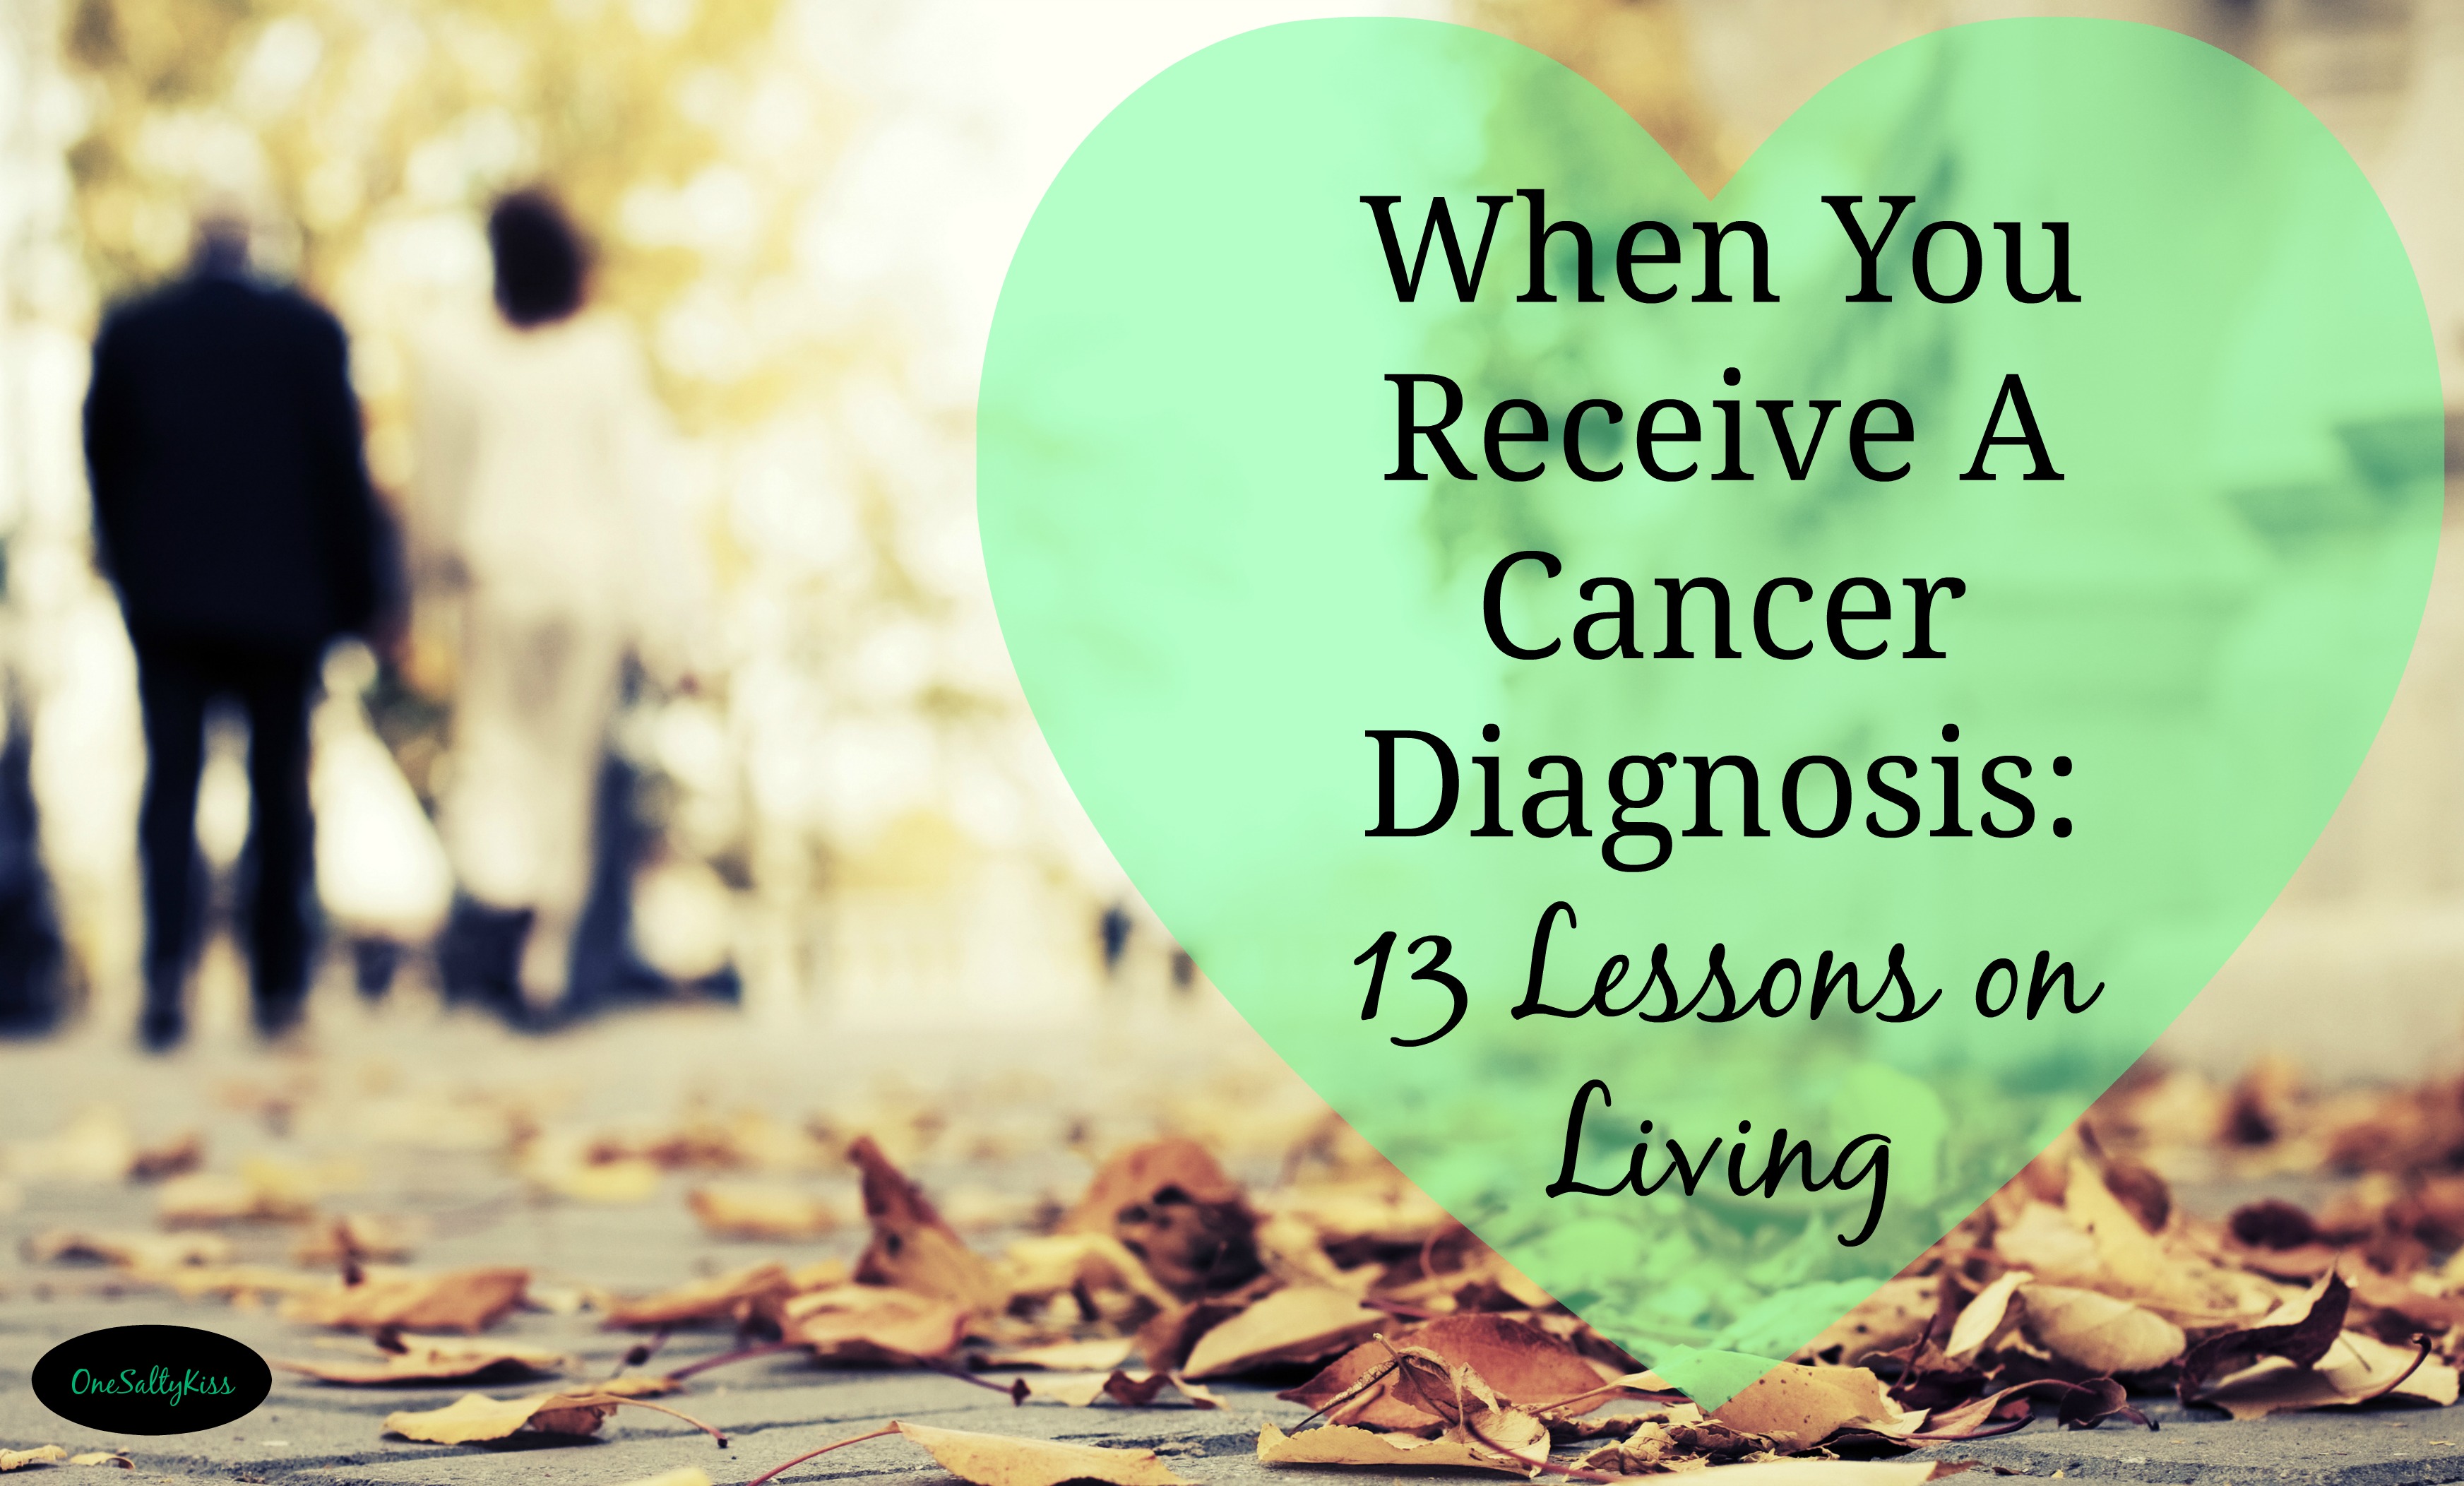 When You Receive A Cancer Diagnosis: 13 Lessons On Living